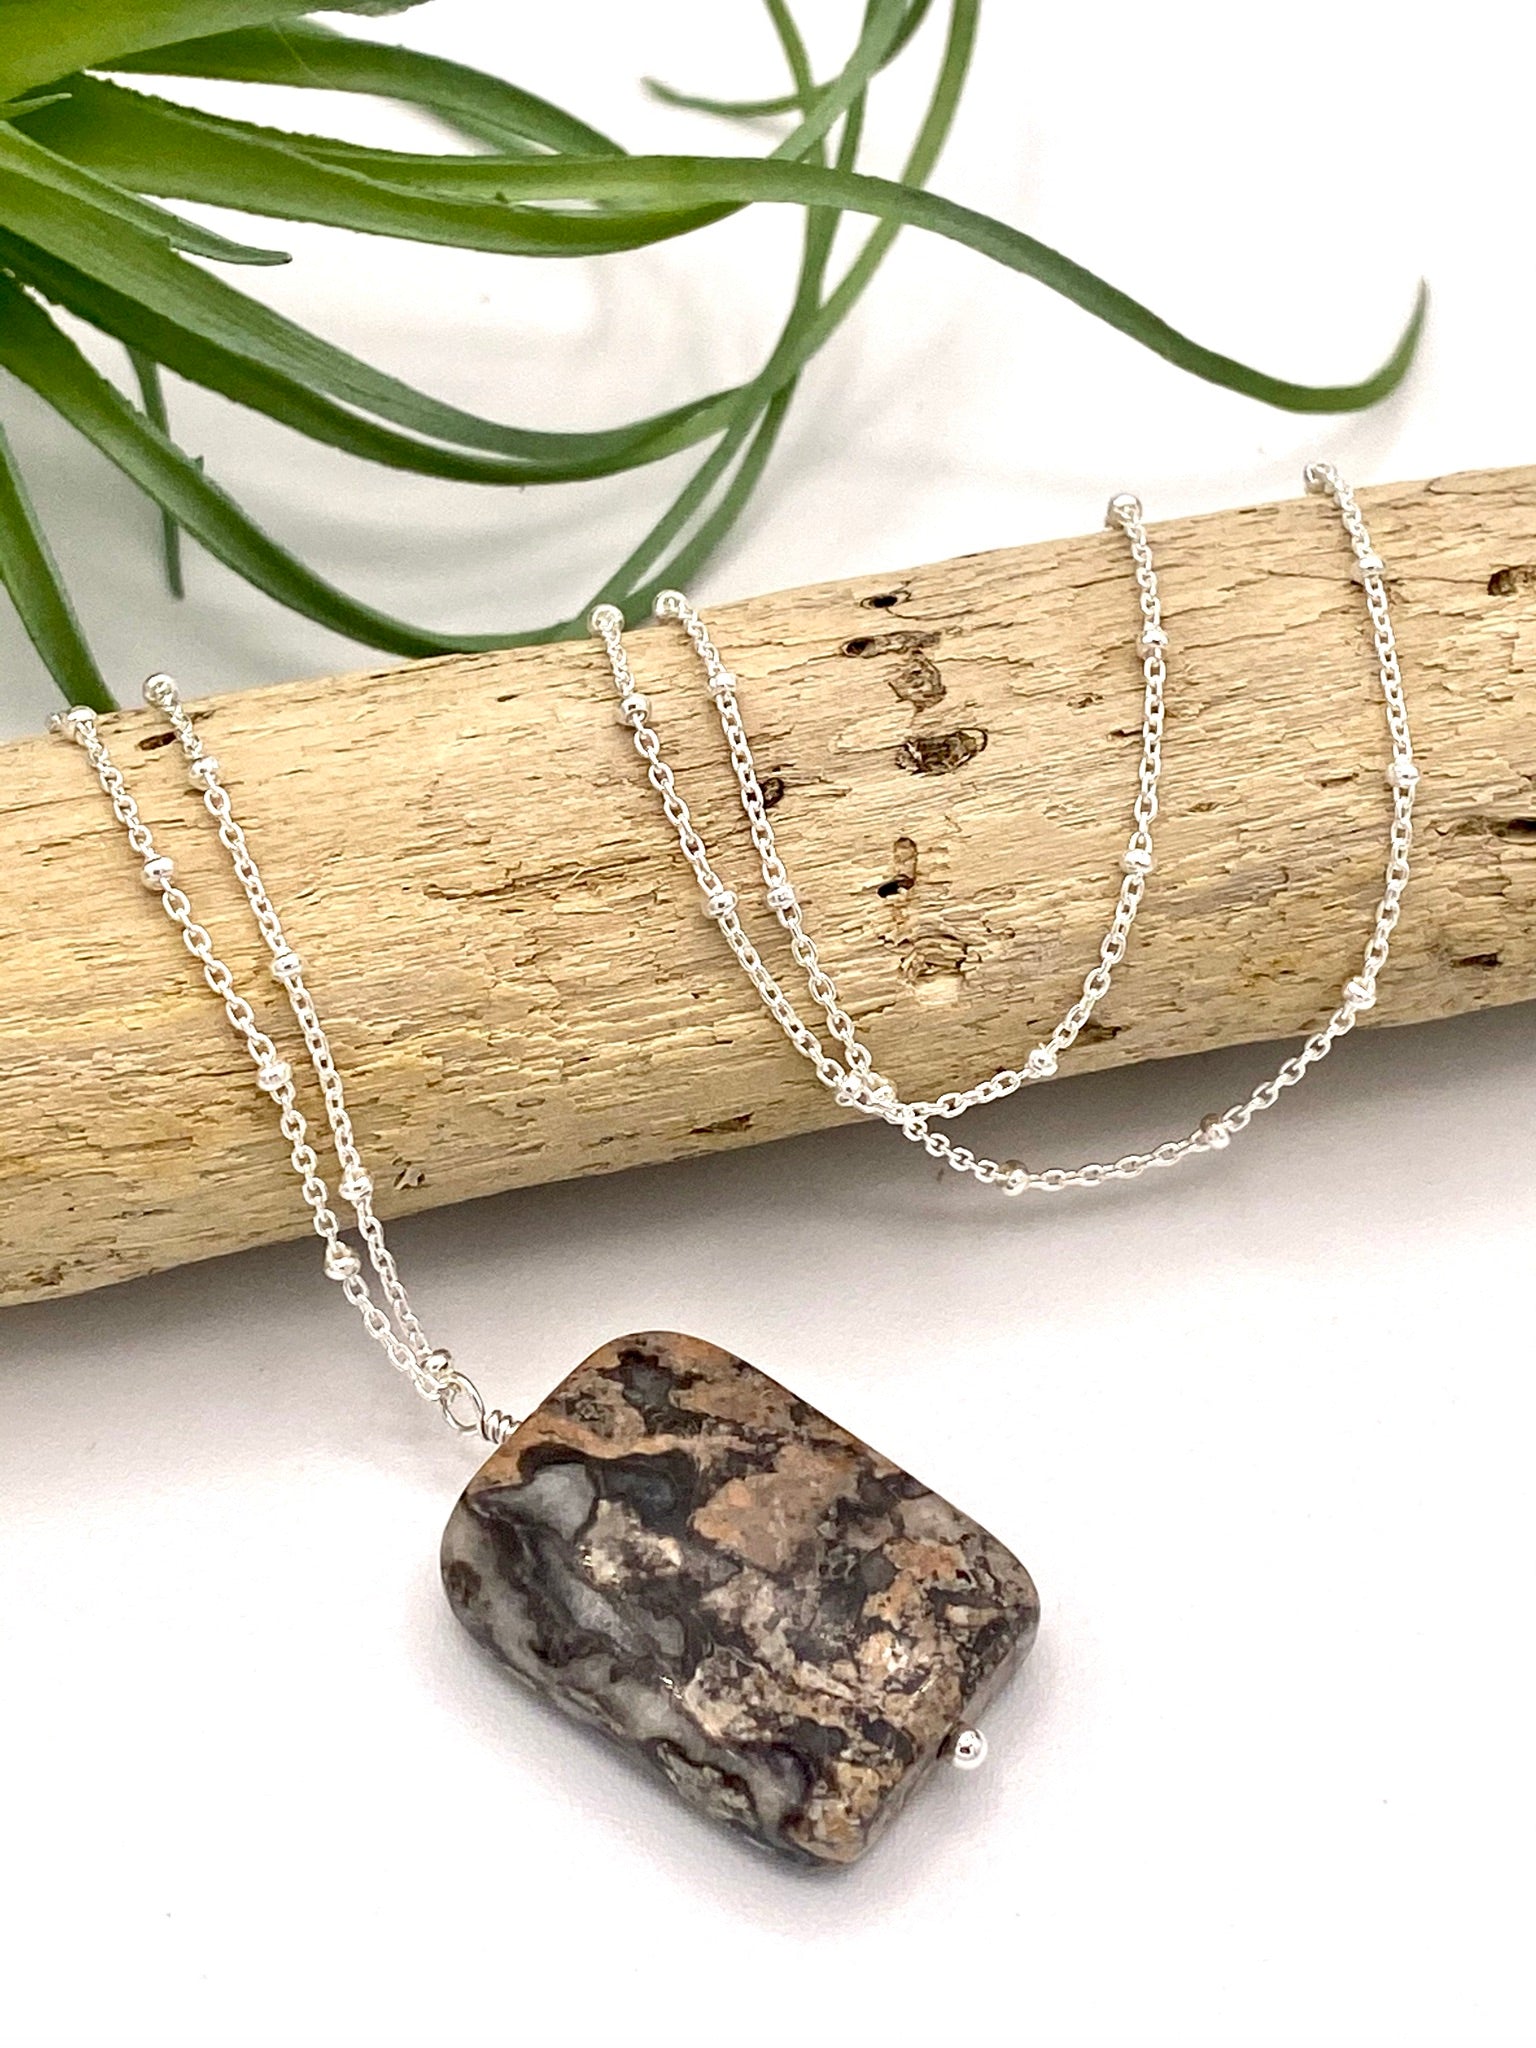 Crazy Lace Agate Pendant Necklace - Earthly Elan